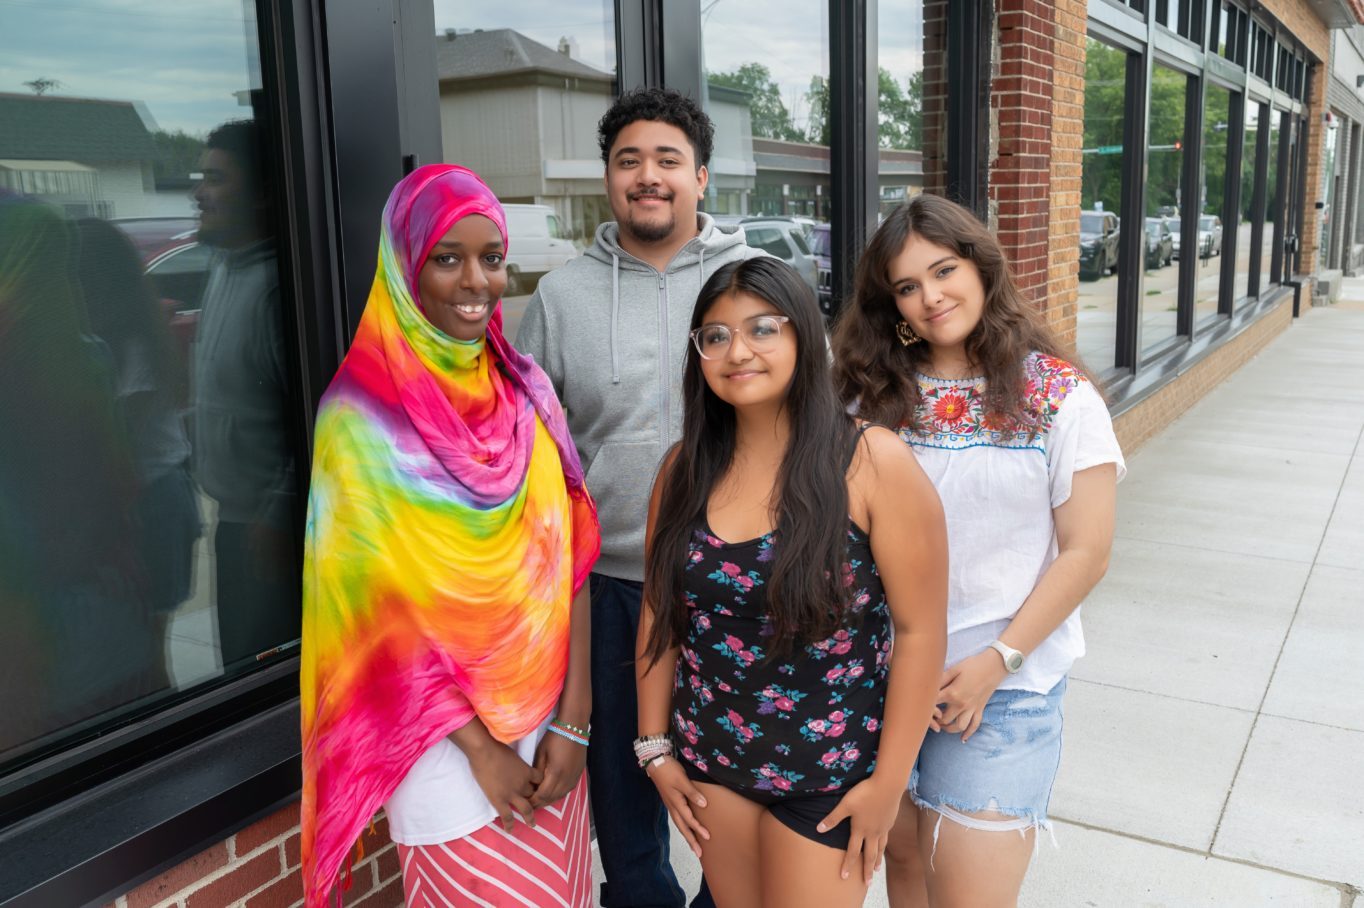 Four teens standing outside of a clinic smiling